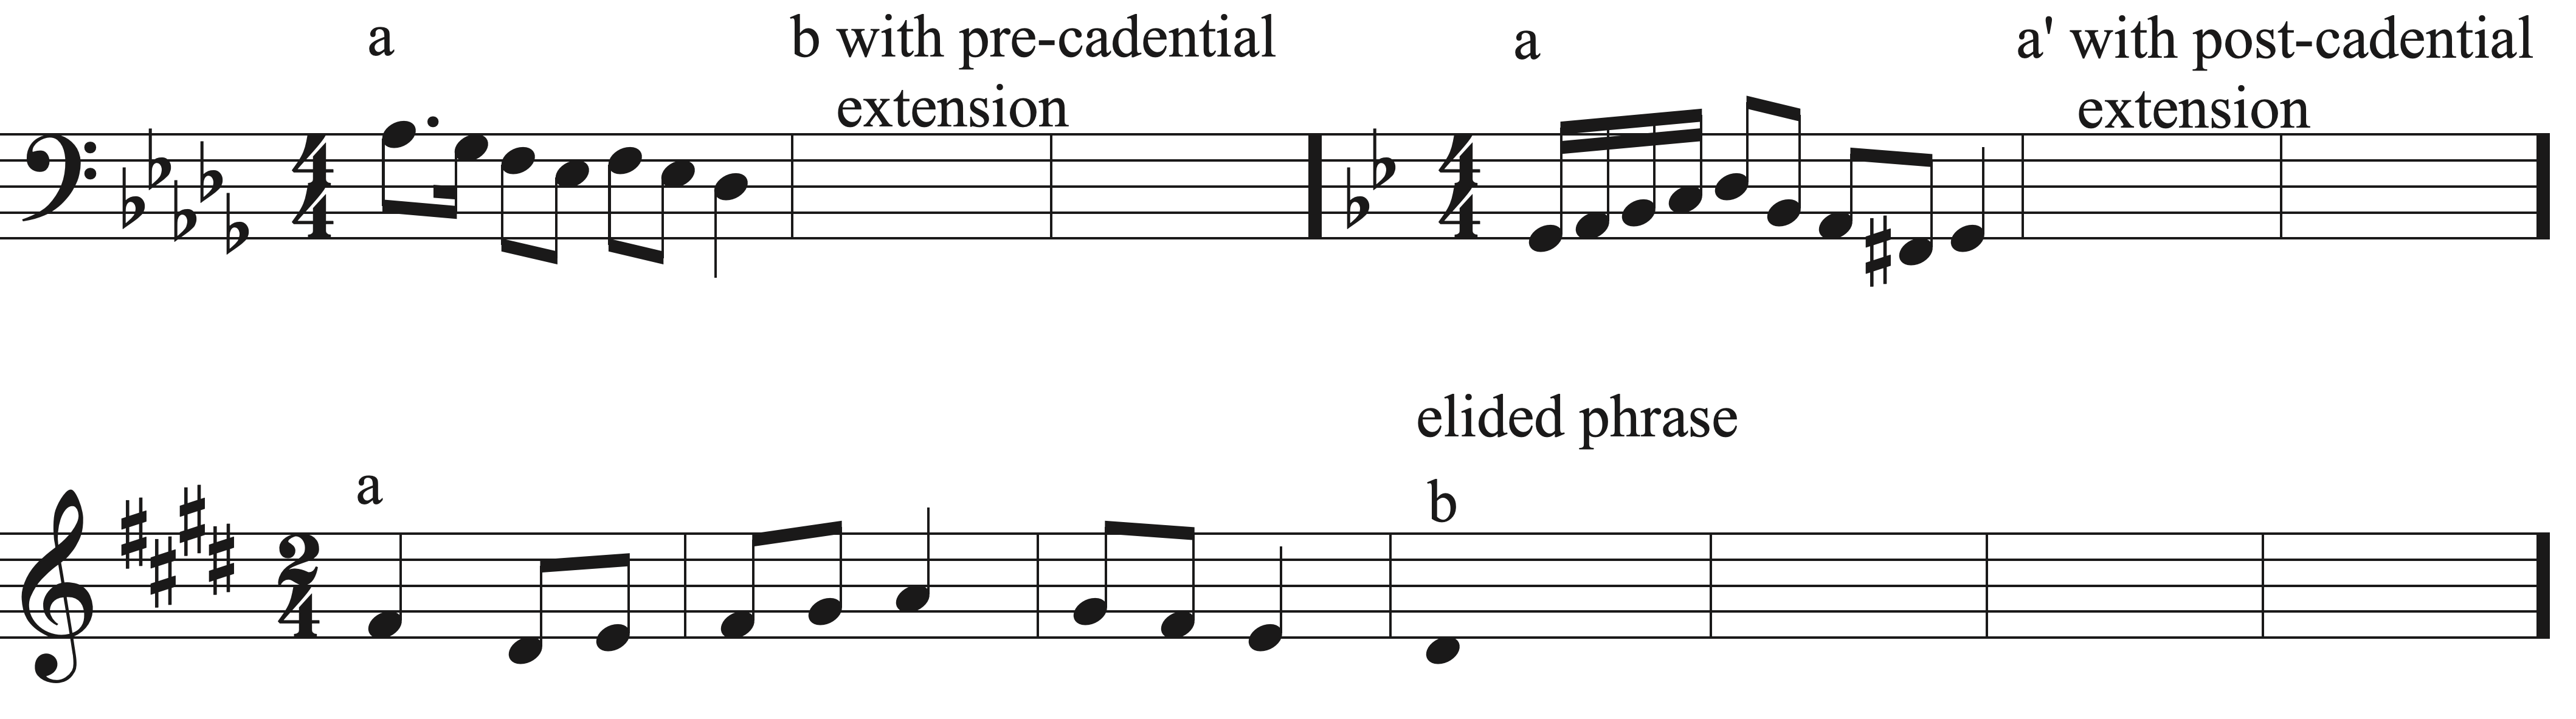 Phrase Elisions and Cadential Extensions Sight Singing exercise example